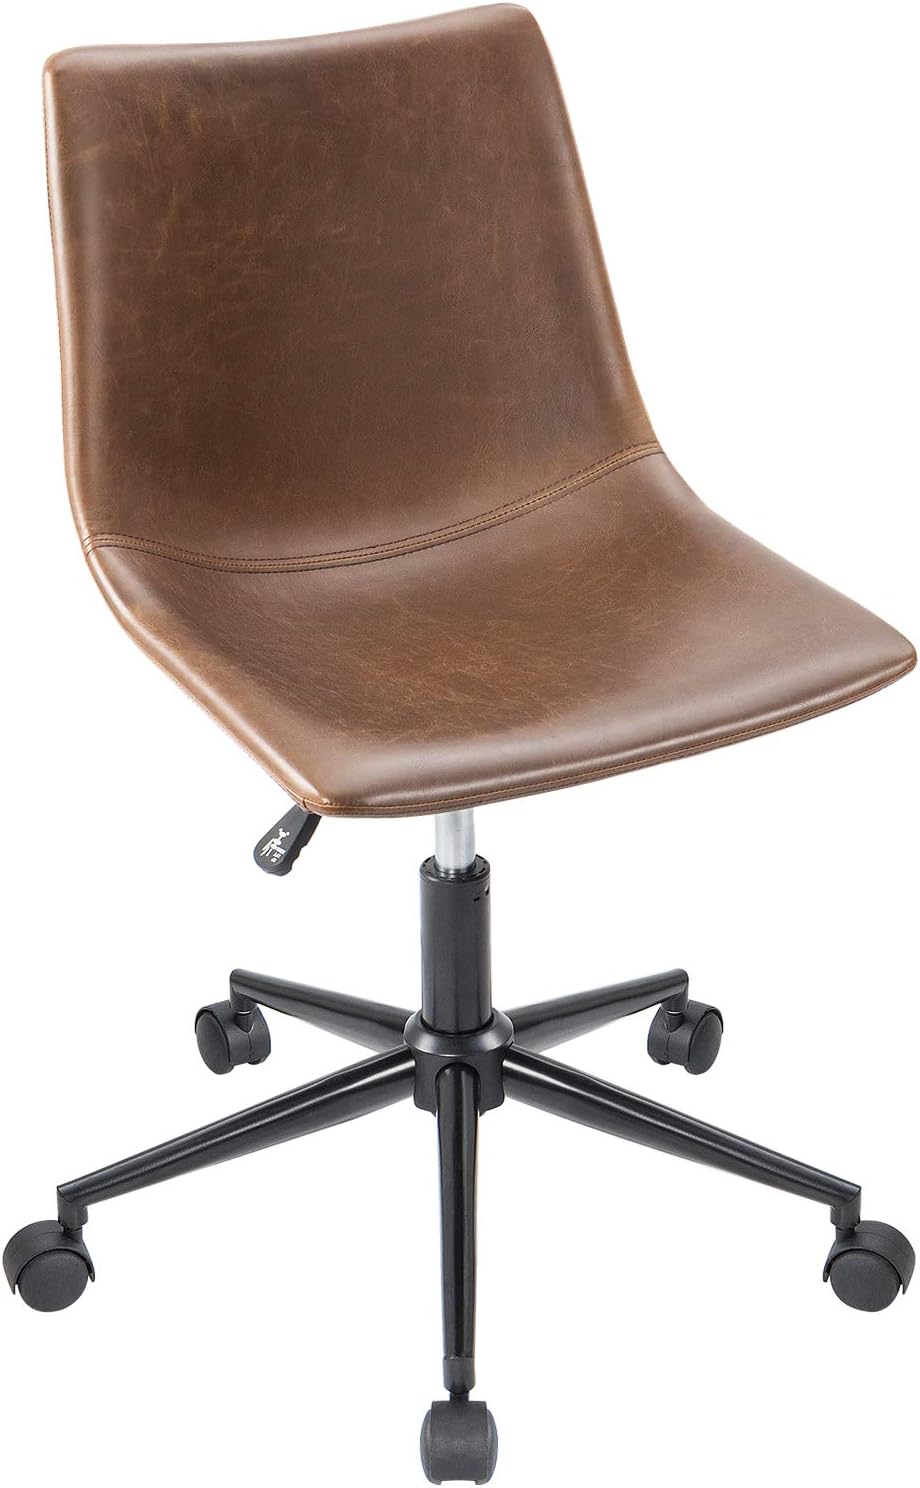 Mid Back Task Chair PU Leather Adjustable Swivel Office Chair Bucket Seat Armless Computer Chair Modern Low Back Desk Conference Chair